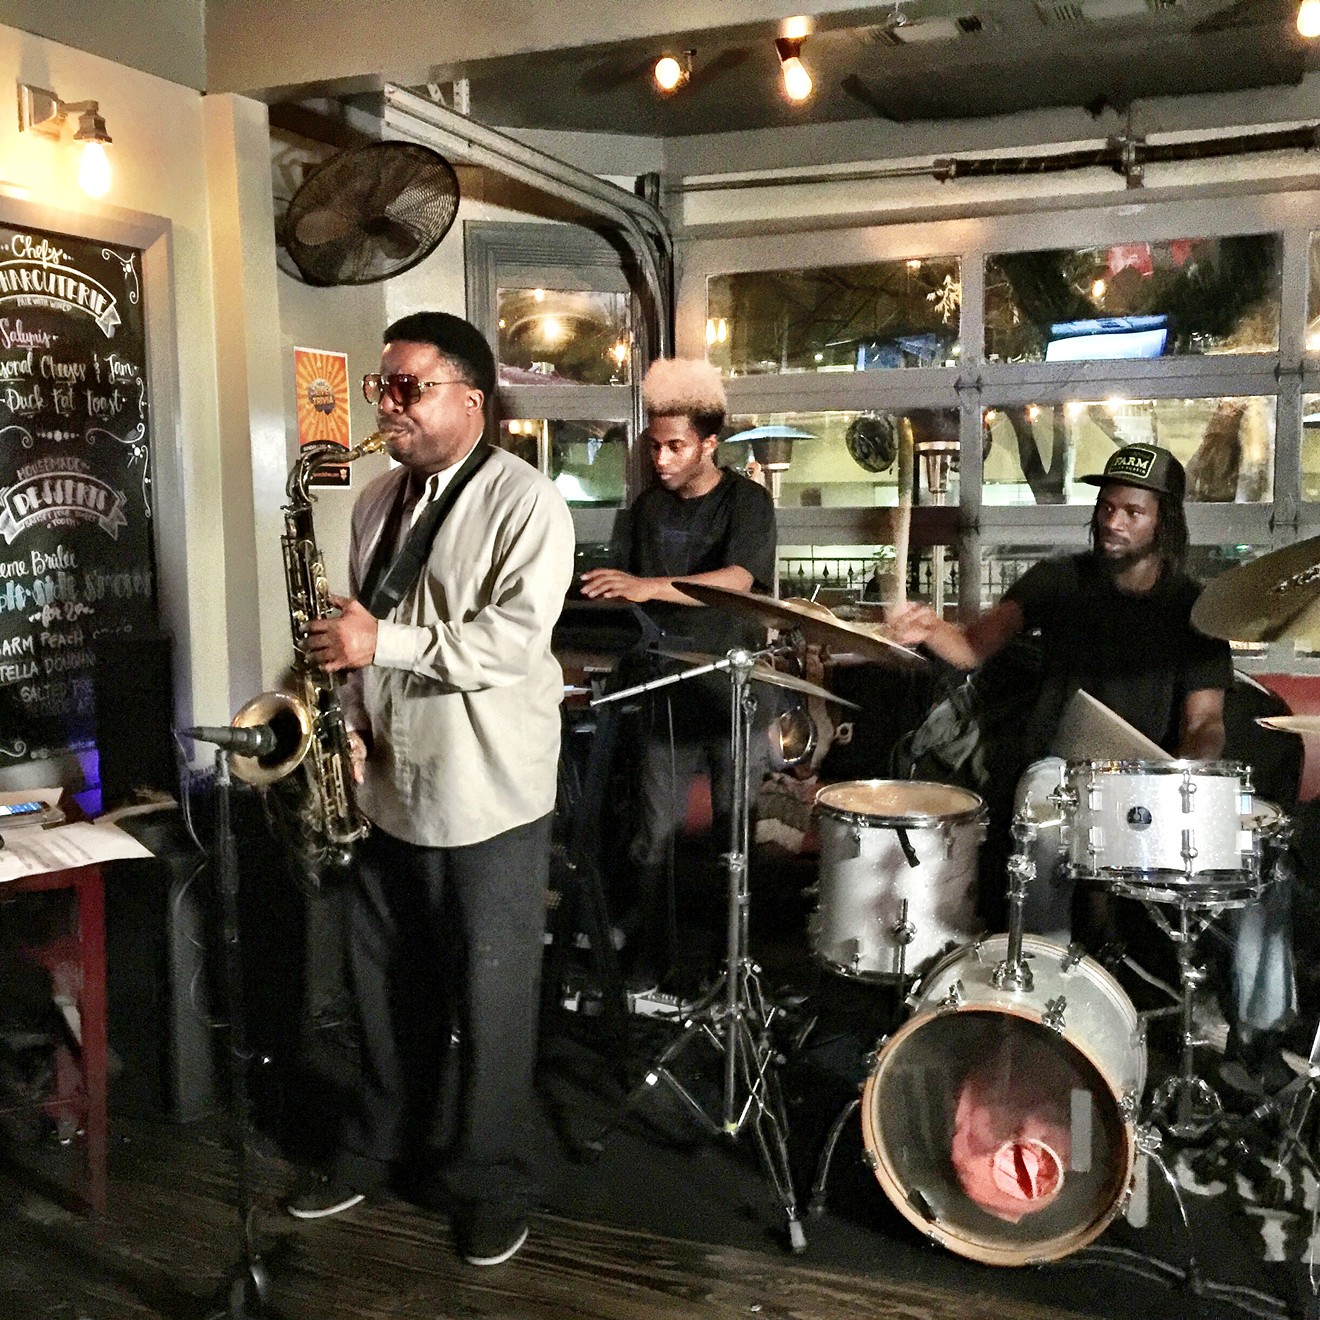 Jason Davis on saxophone, Byron Crenshaw on bass and Frank Moka on drums perform live at The Common Table in Uptown.